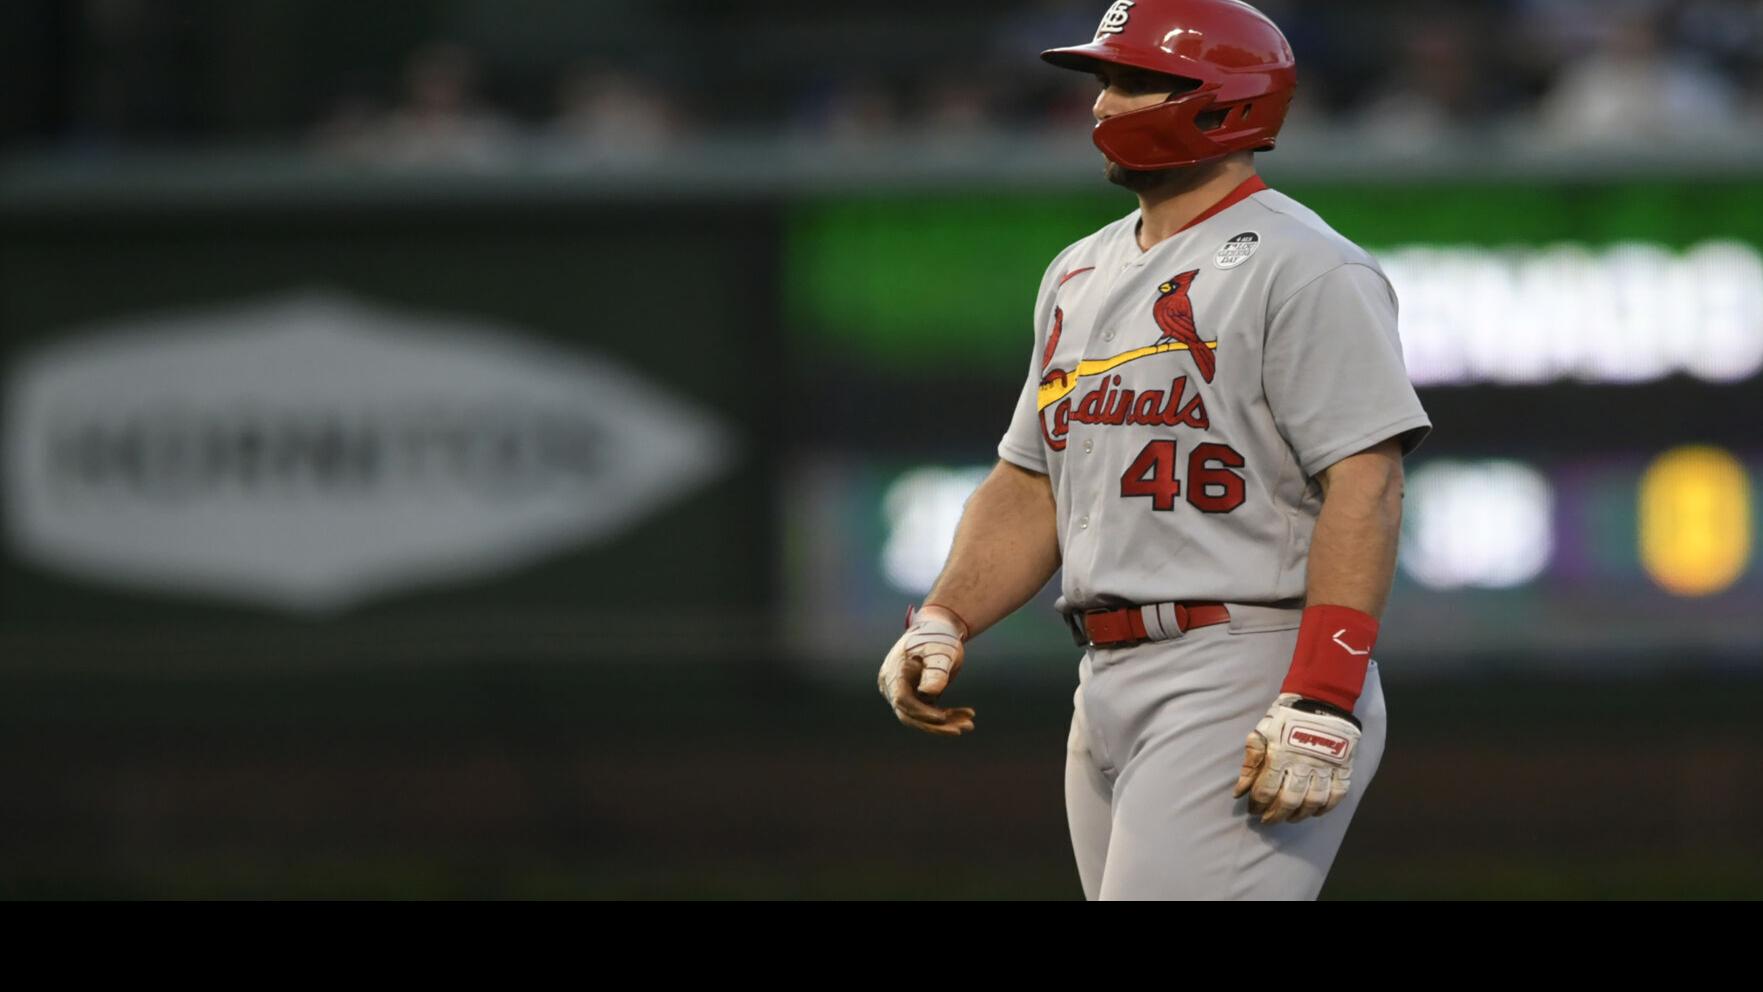 As one hitting streak comes to an end, another continues for Cardinals 'remarkable' Goldschmidt